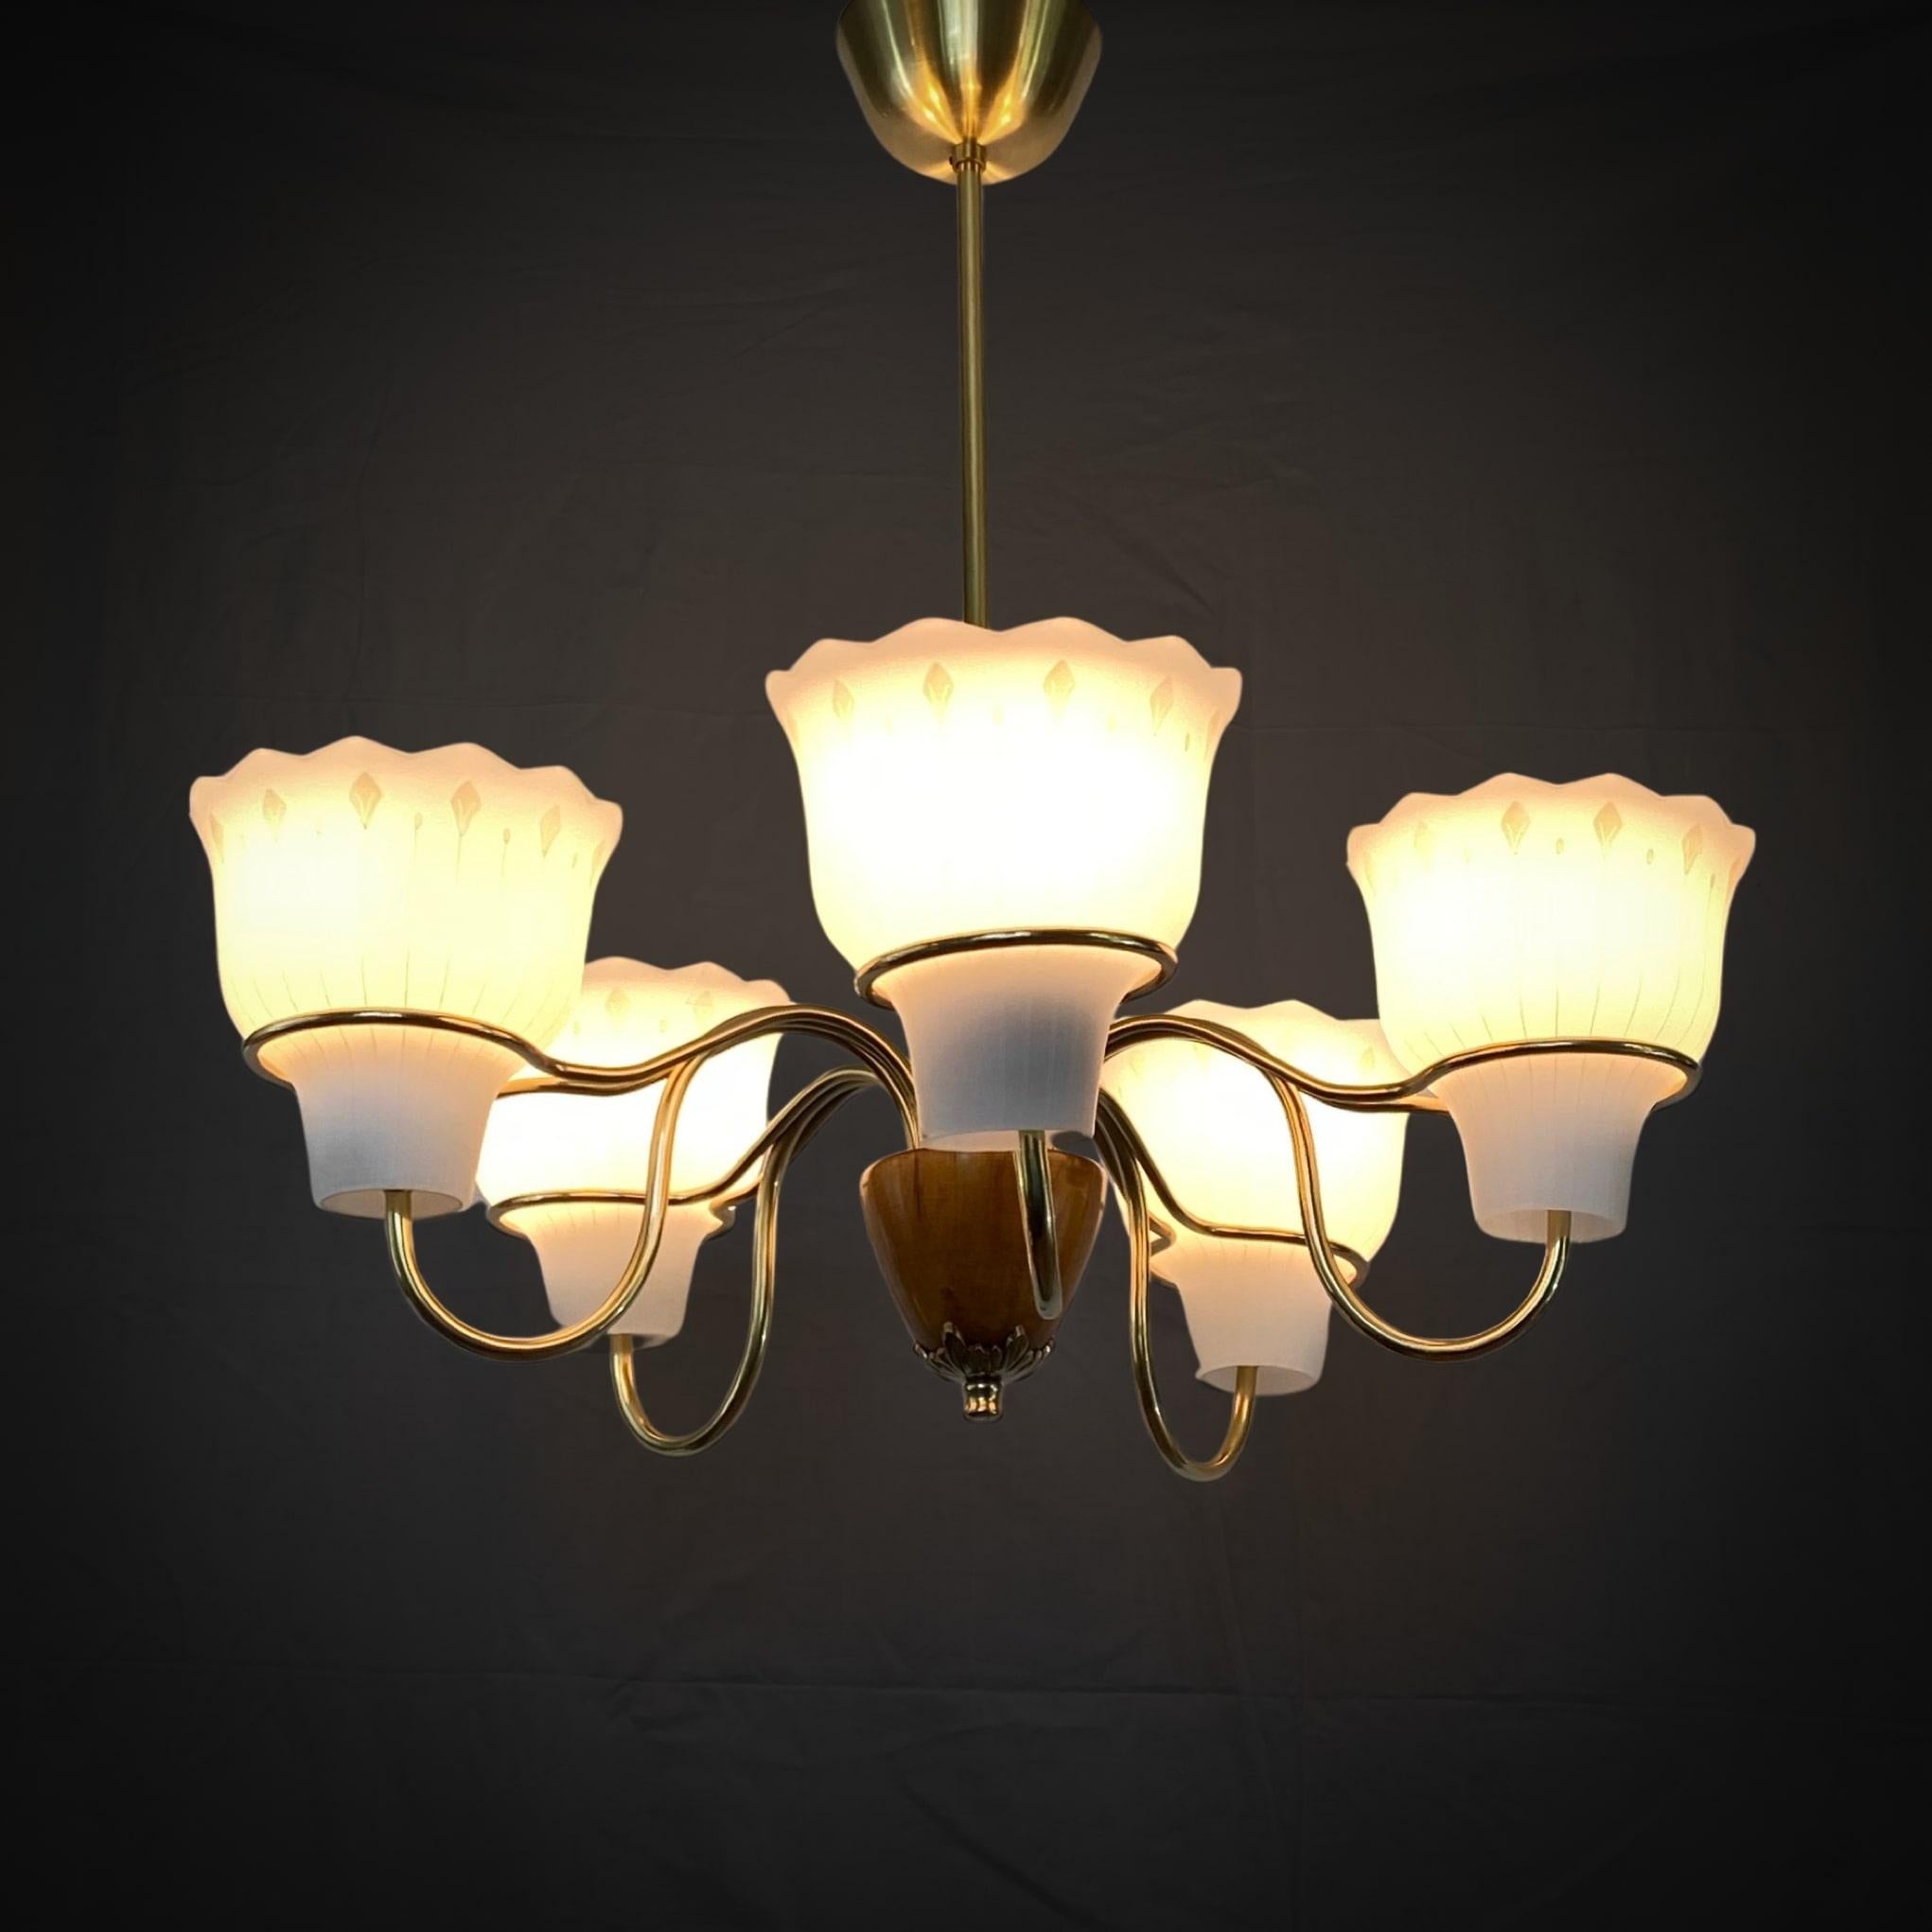 Swedish 1940s chandelier in the manner of Hans Bergström and ASEA. Brass frame with five flower-shaped glass shades held in place by beautiful brass rings. This type of construction was successfully used by Gunnar Asplund for several of his lamps.